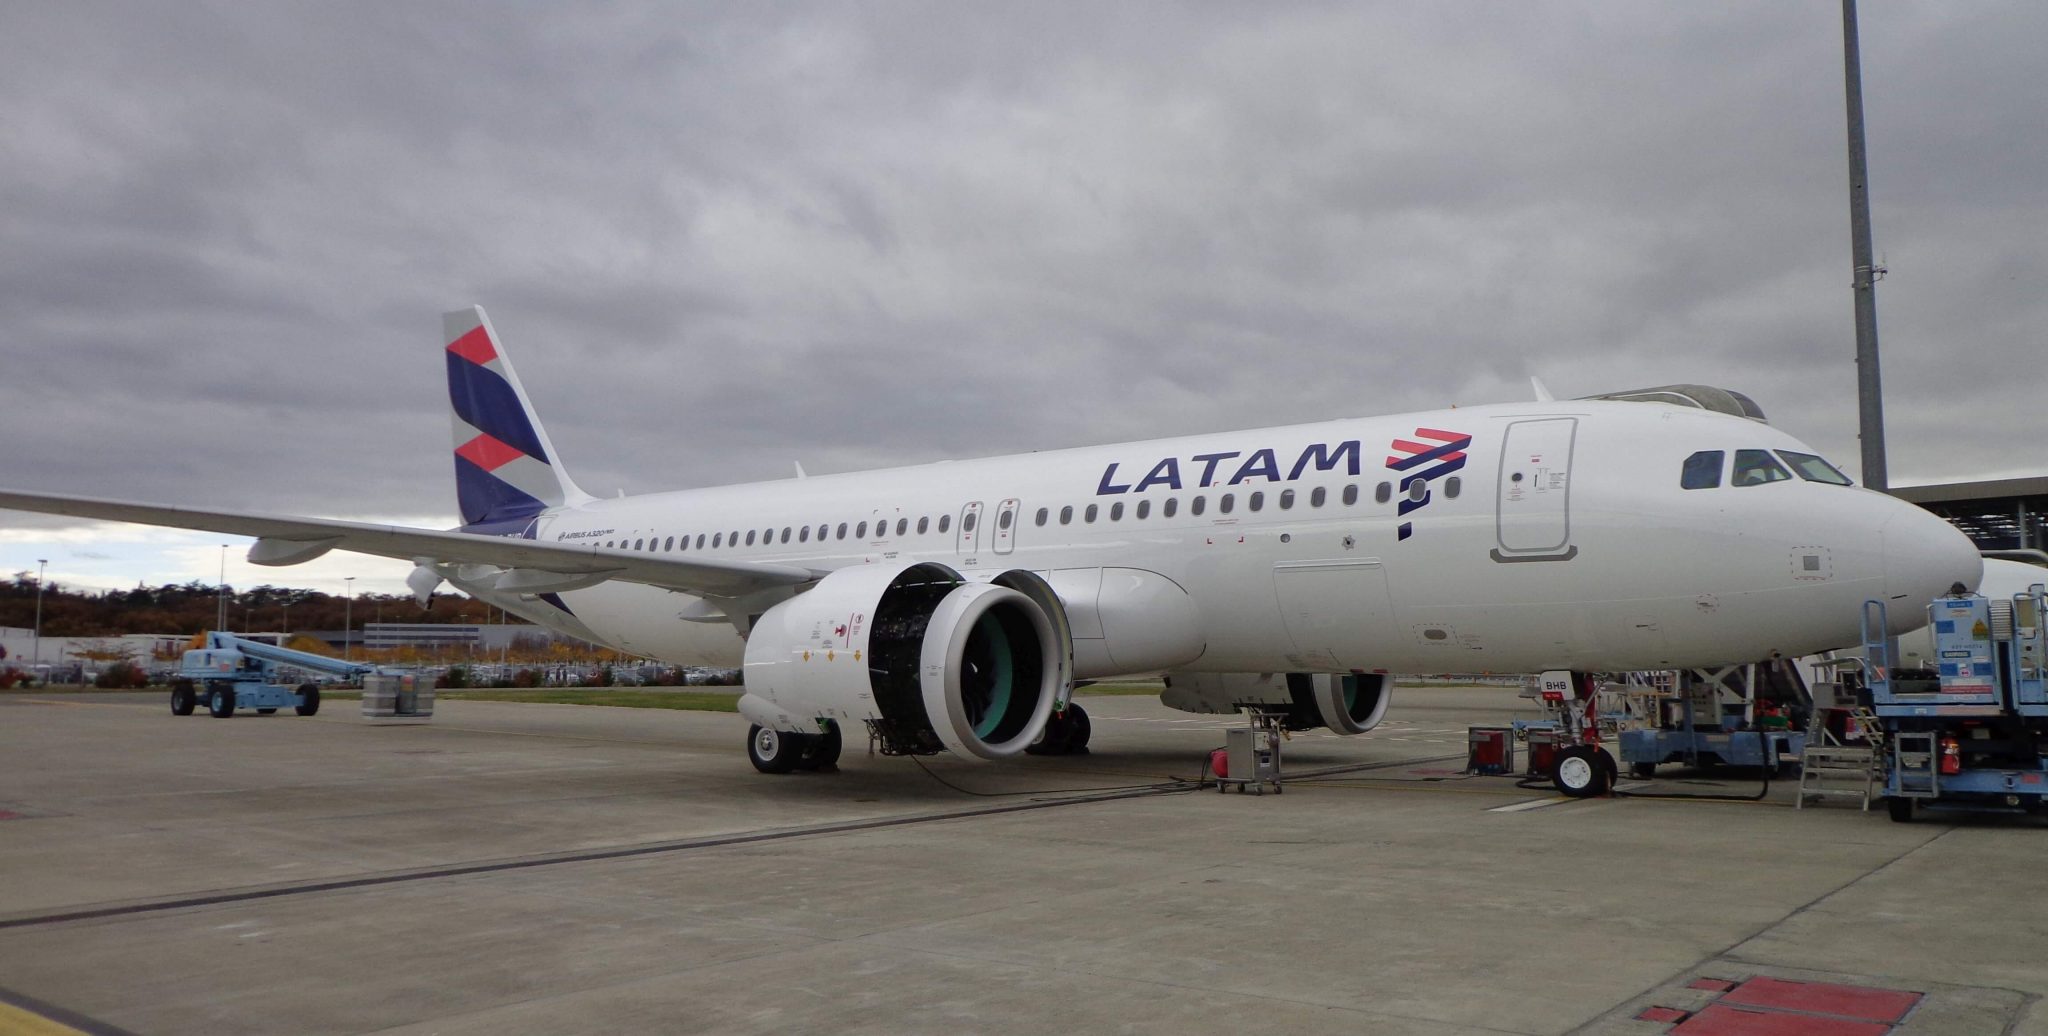 US Court approves LATAM’s Reorganization Plan